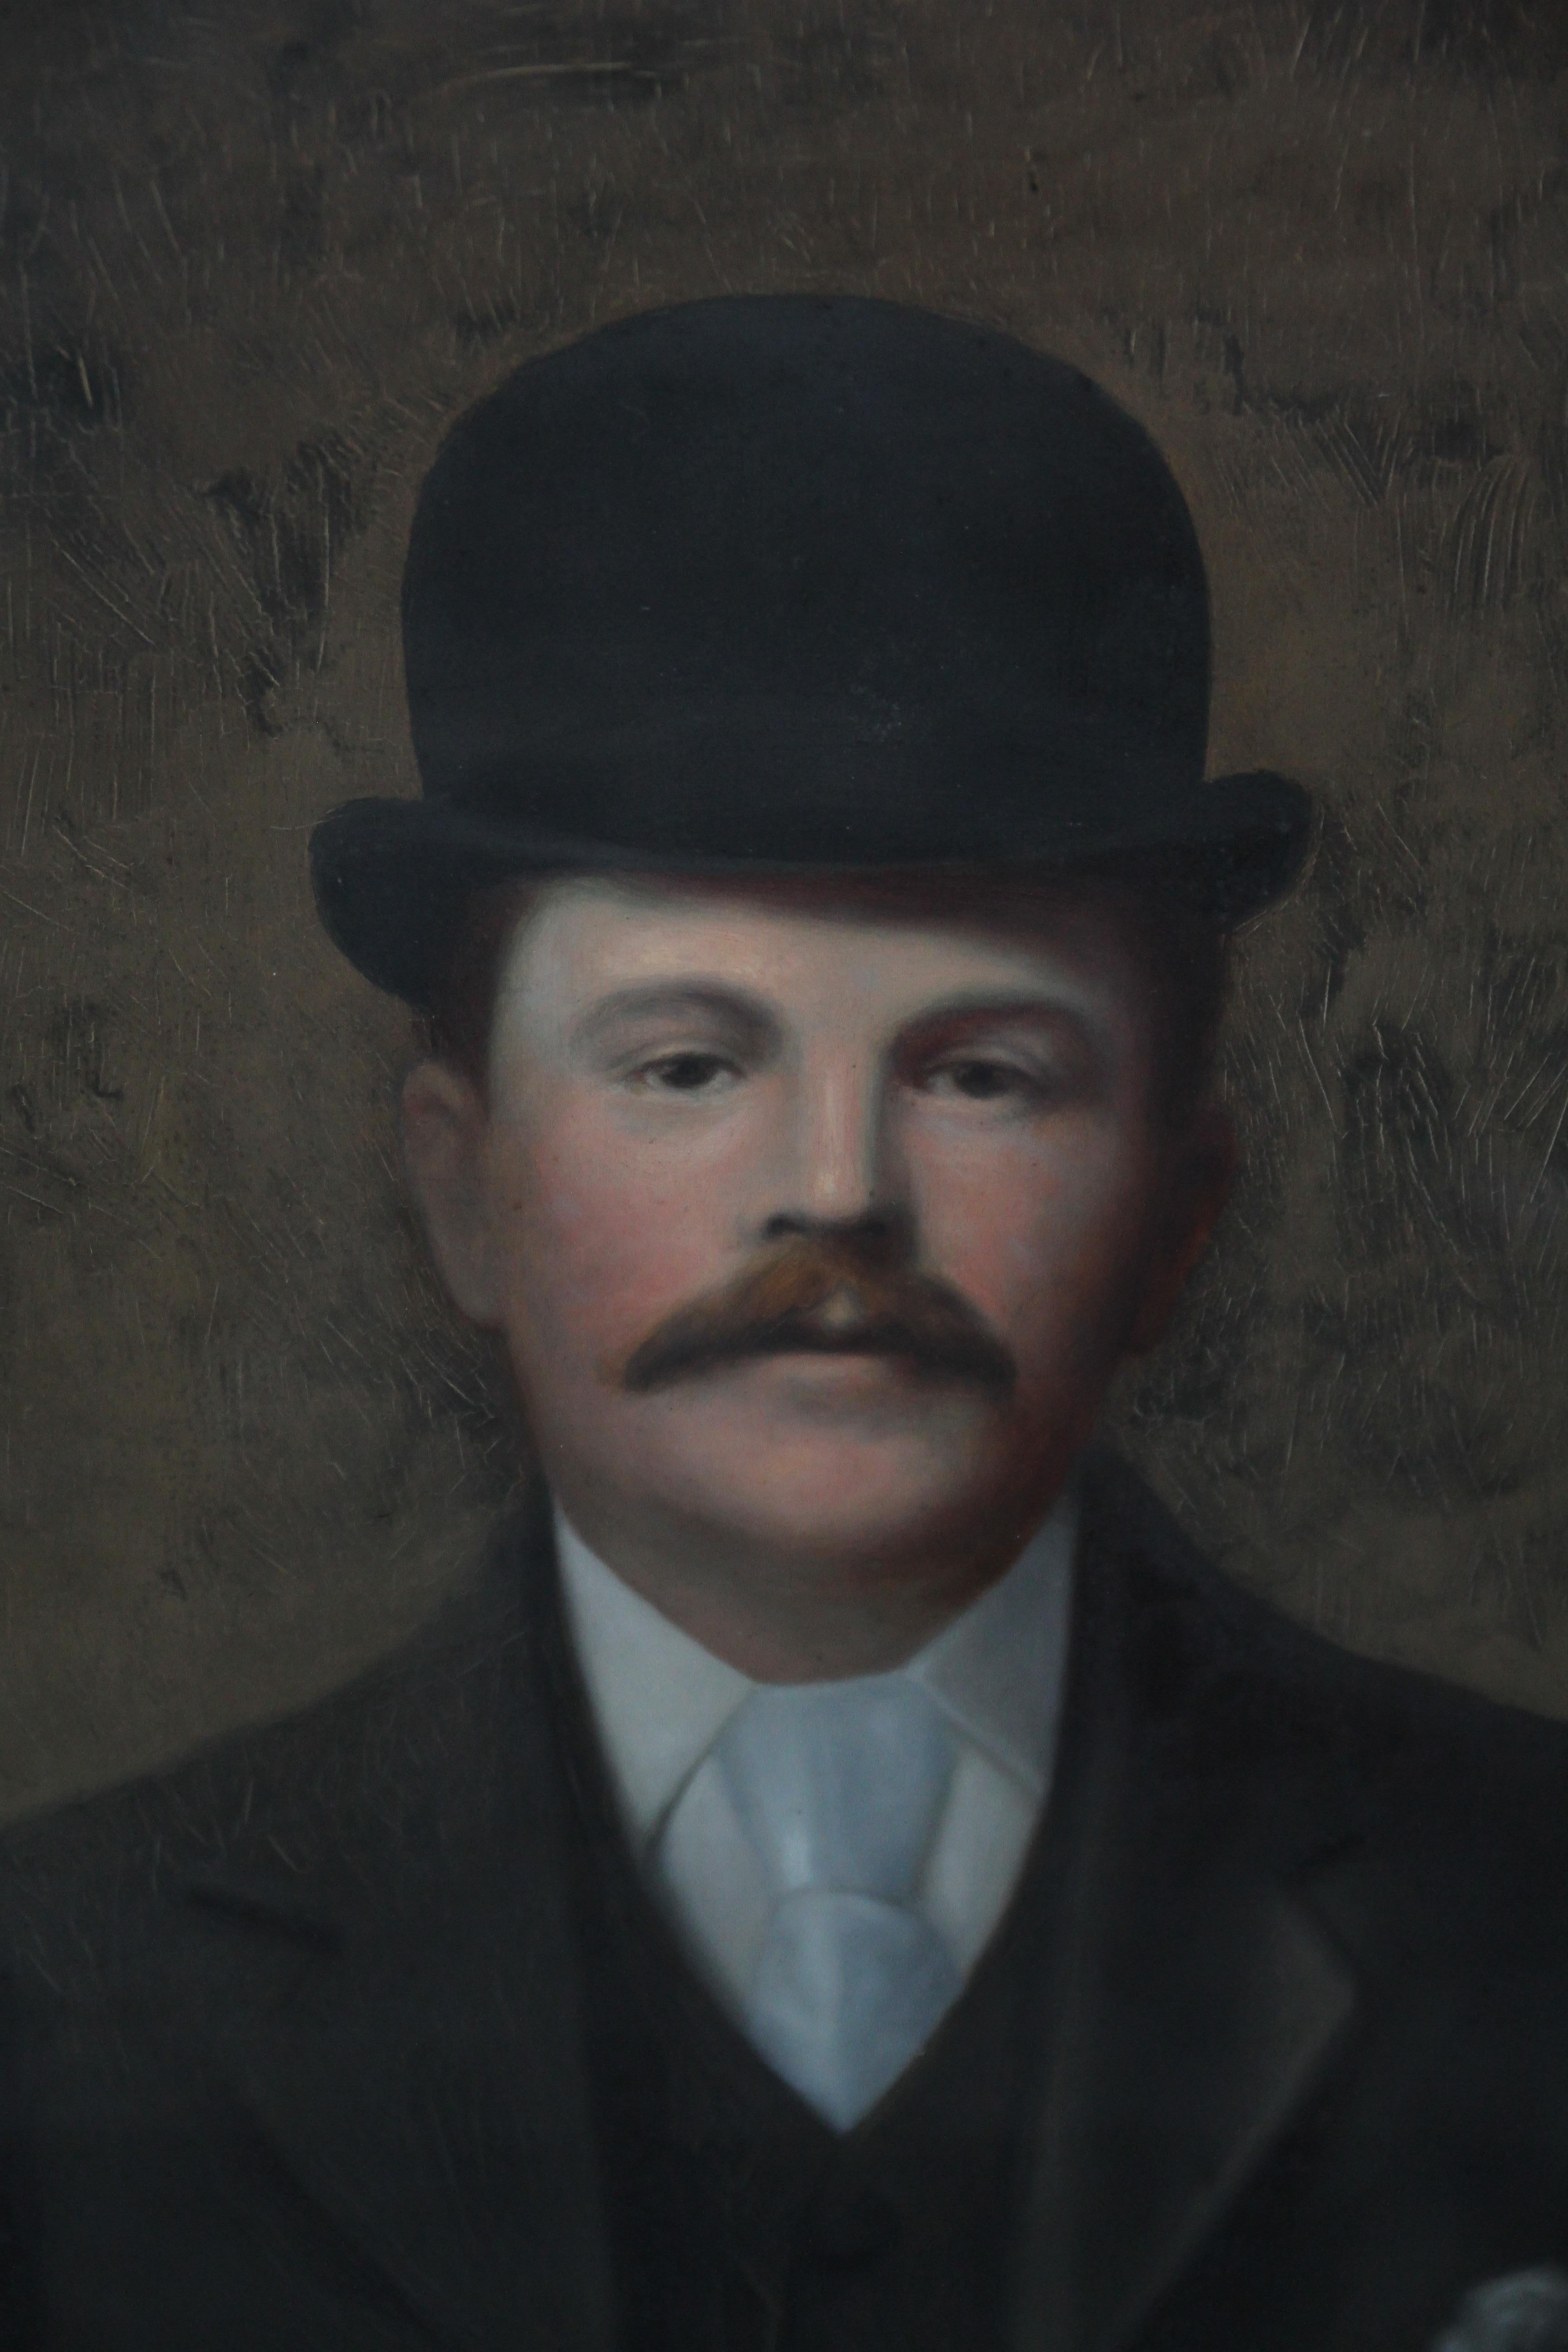 This charming British male portrait oil painting is of a gentleman in an iconic bowler hat. Painted circa 1880 it is a wonderful soft focus realistic image of a man in a suit with a wide pale blue tie and handkerchief in pocket. We can also just see